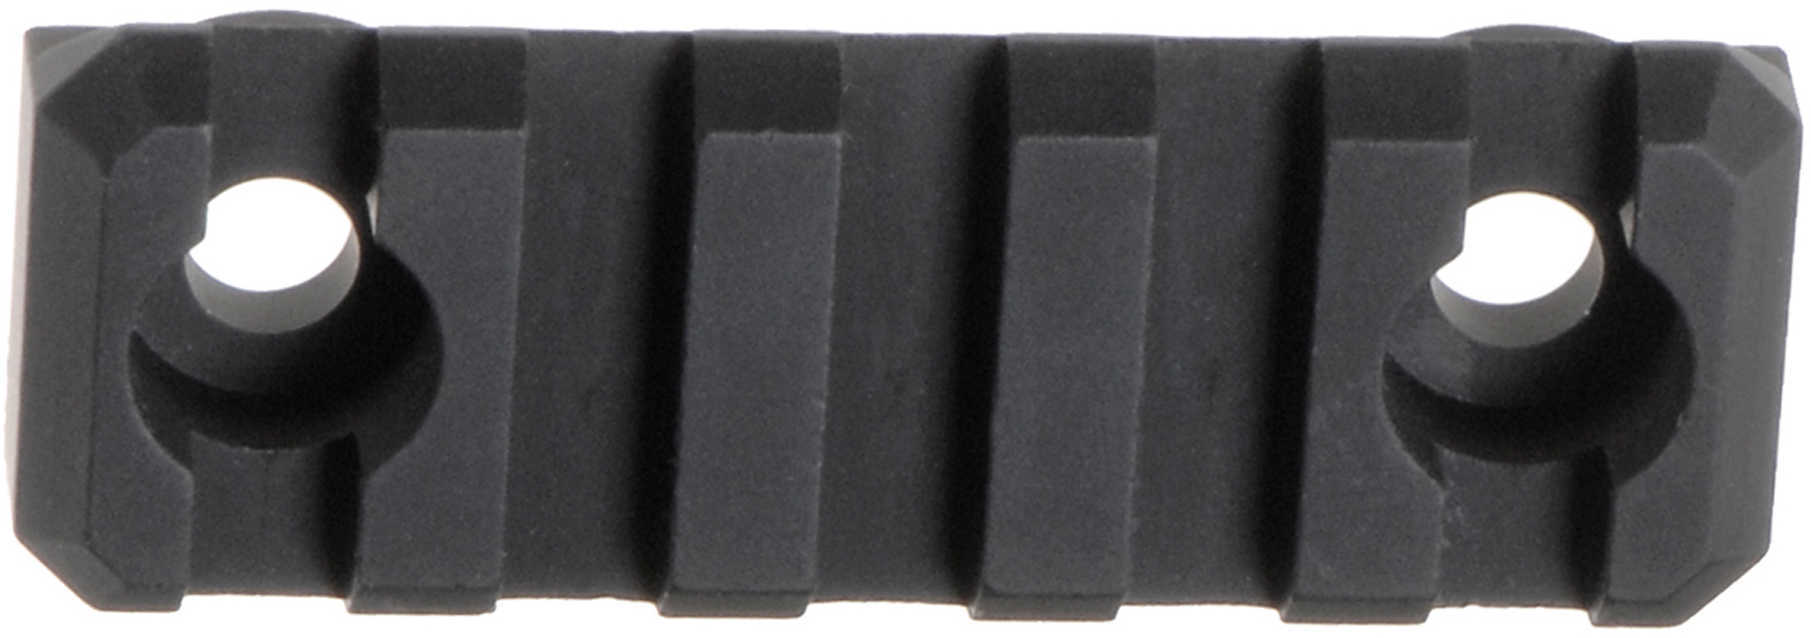 Troy Industries Rail Section 2" Black Quick-Attach